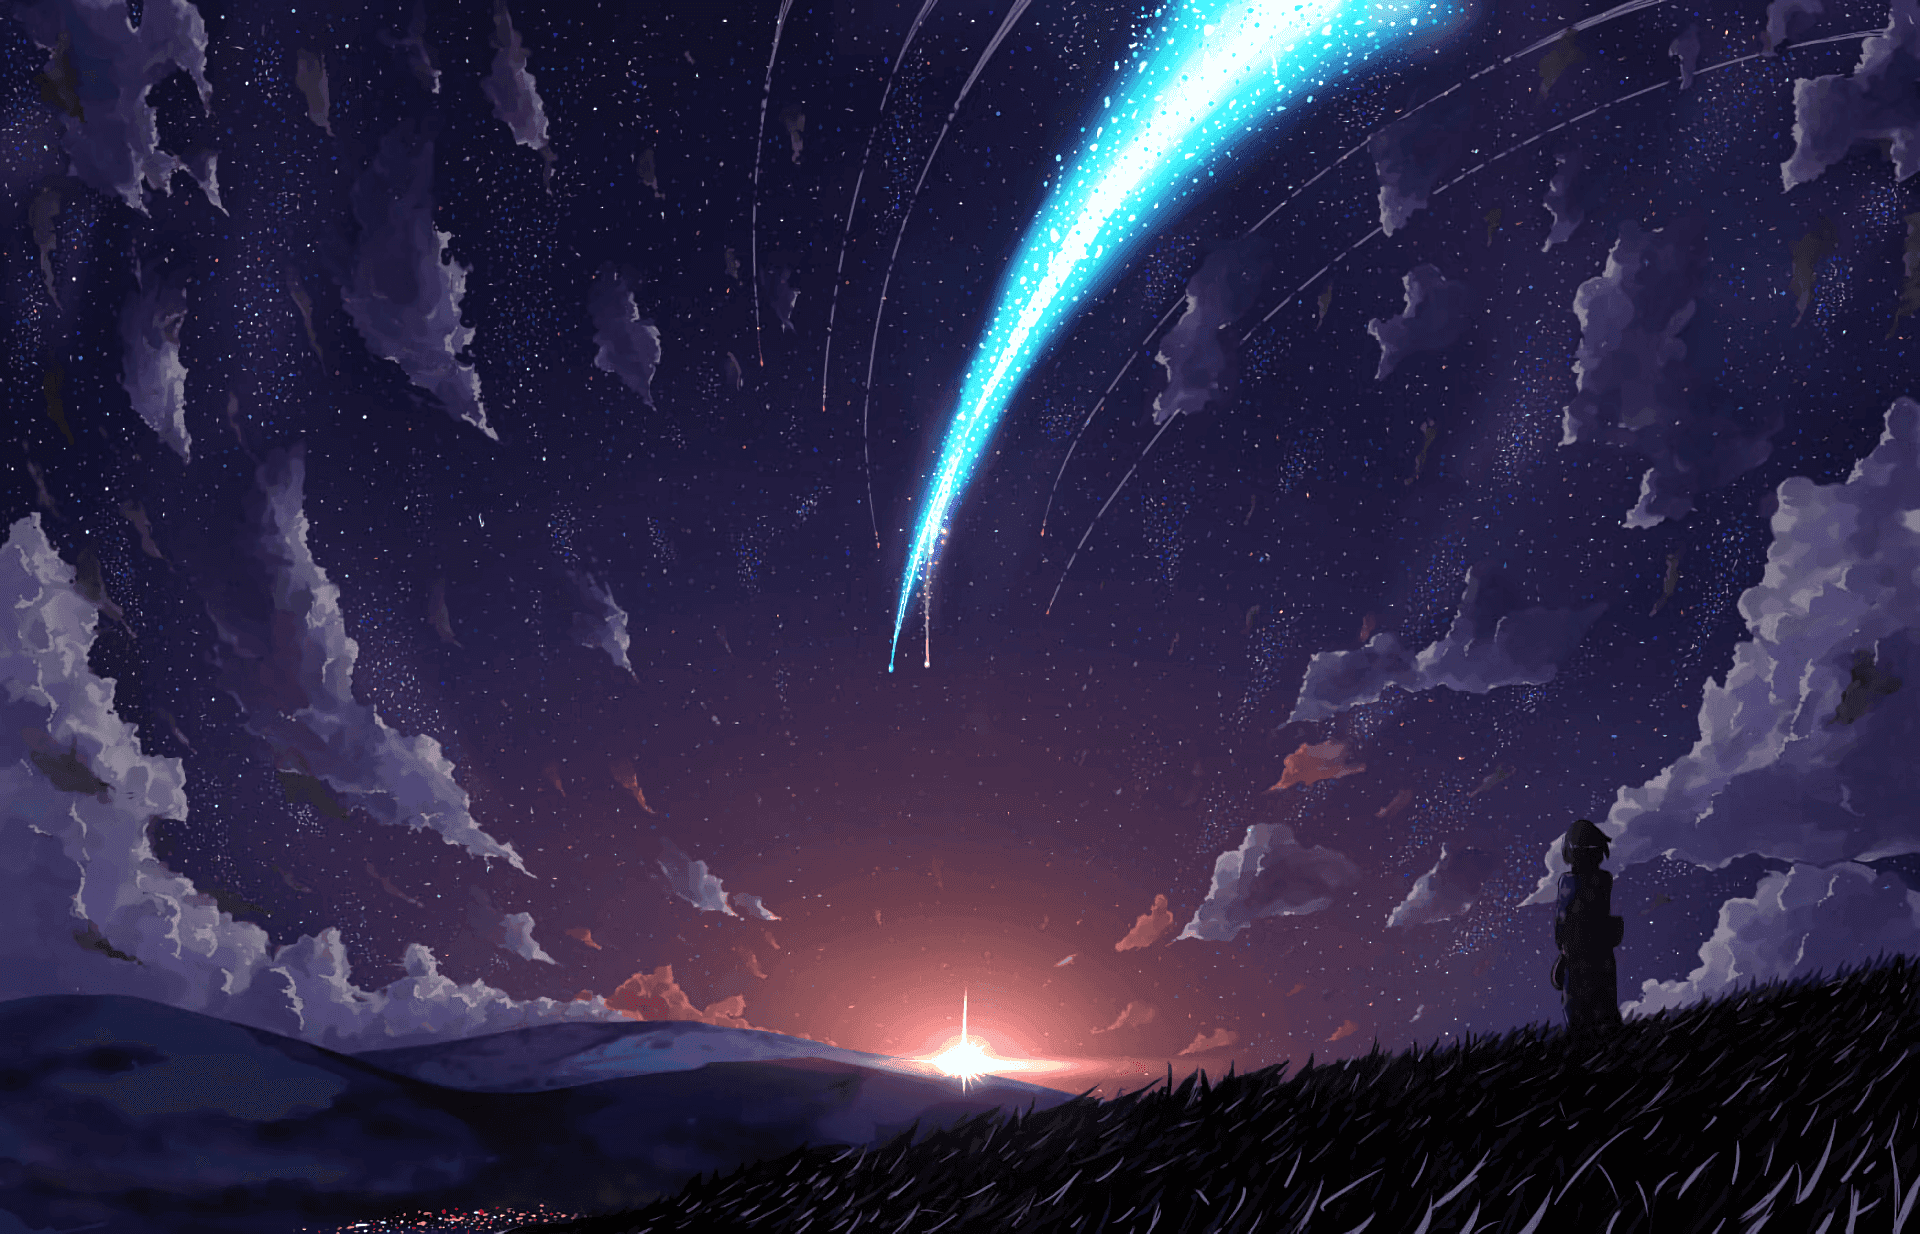 Wish Upon a Star - Anime Girls Wallpapers and Images - Desktop Nexus Groups